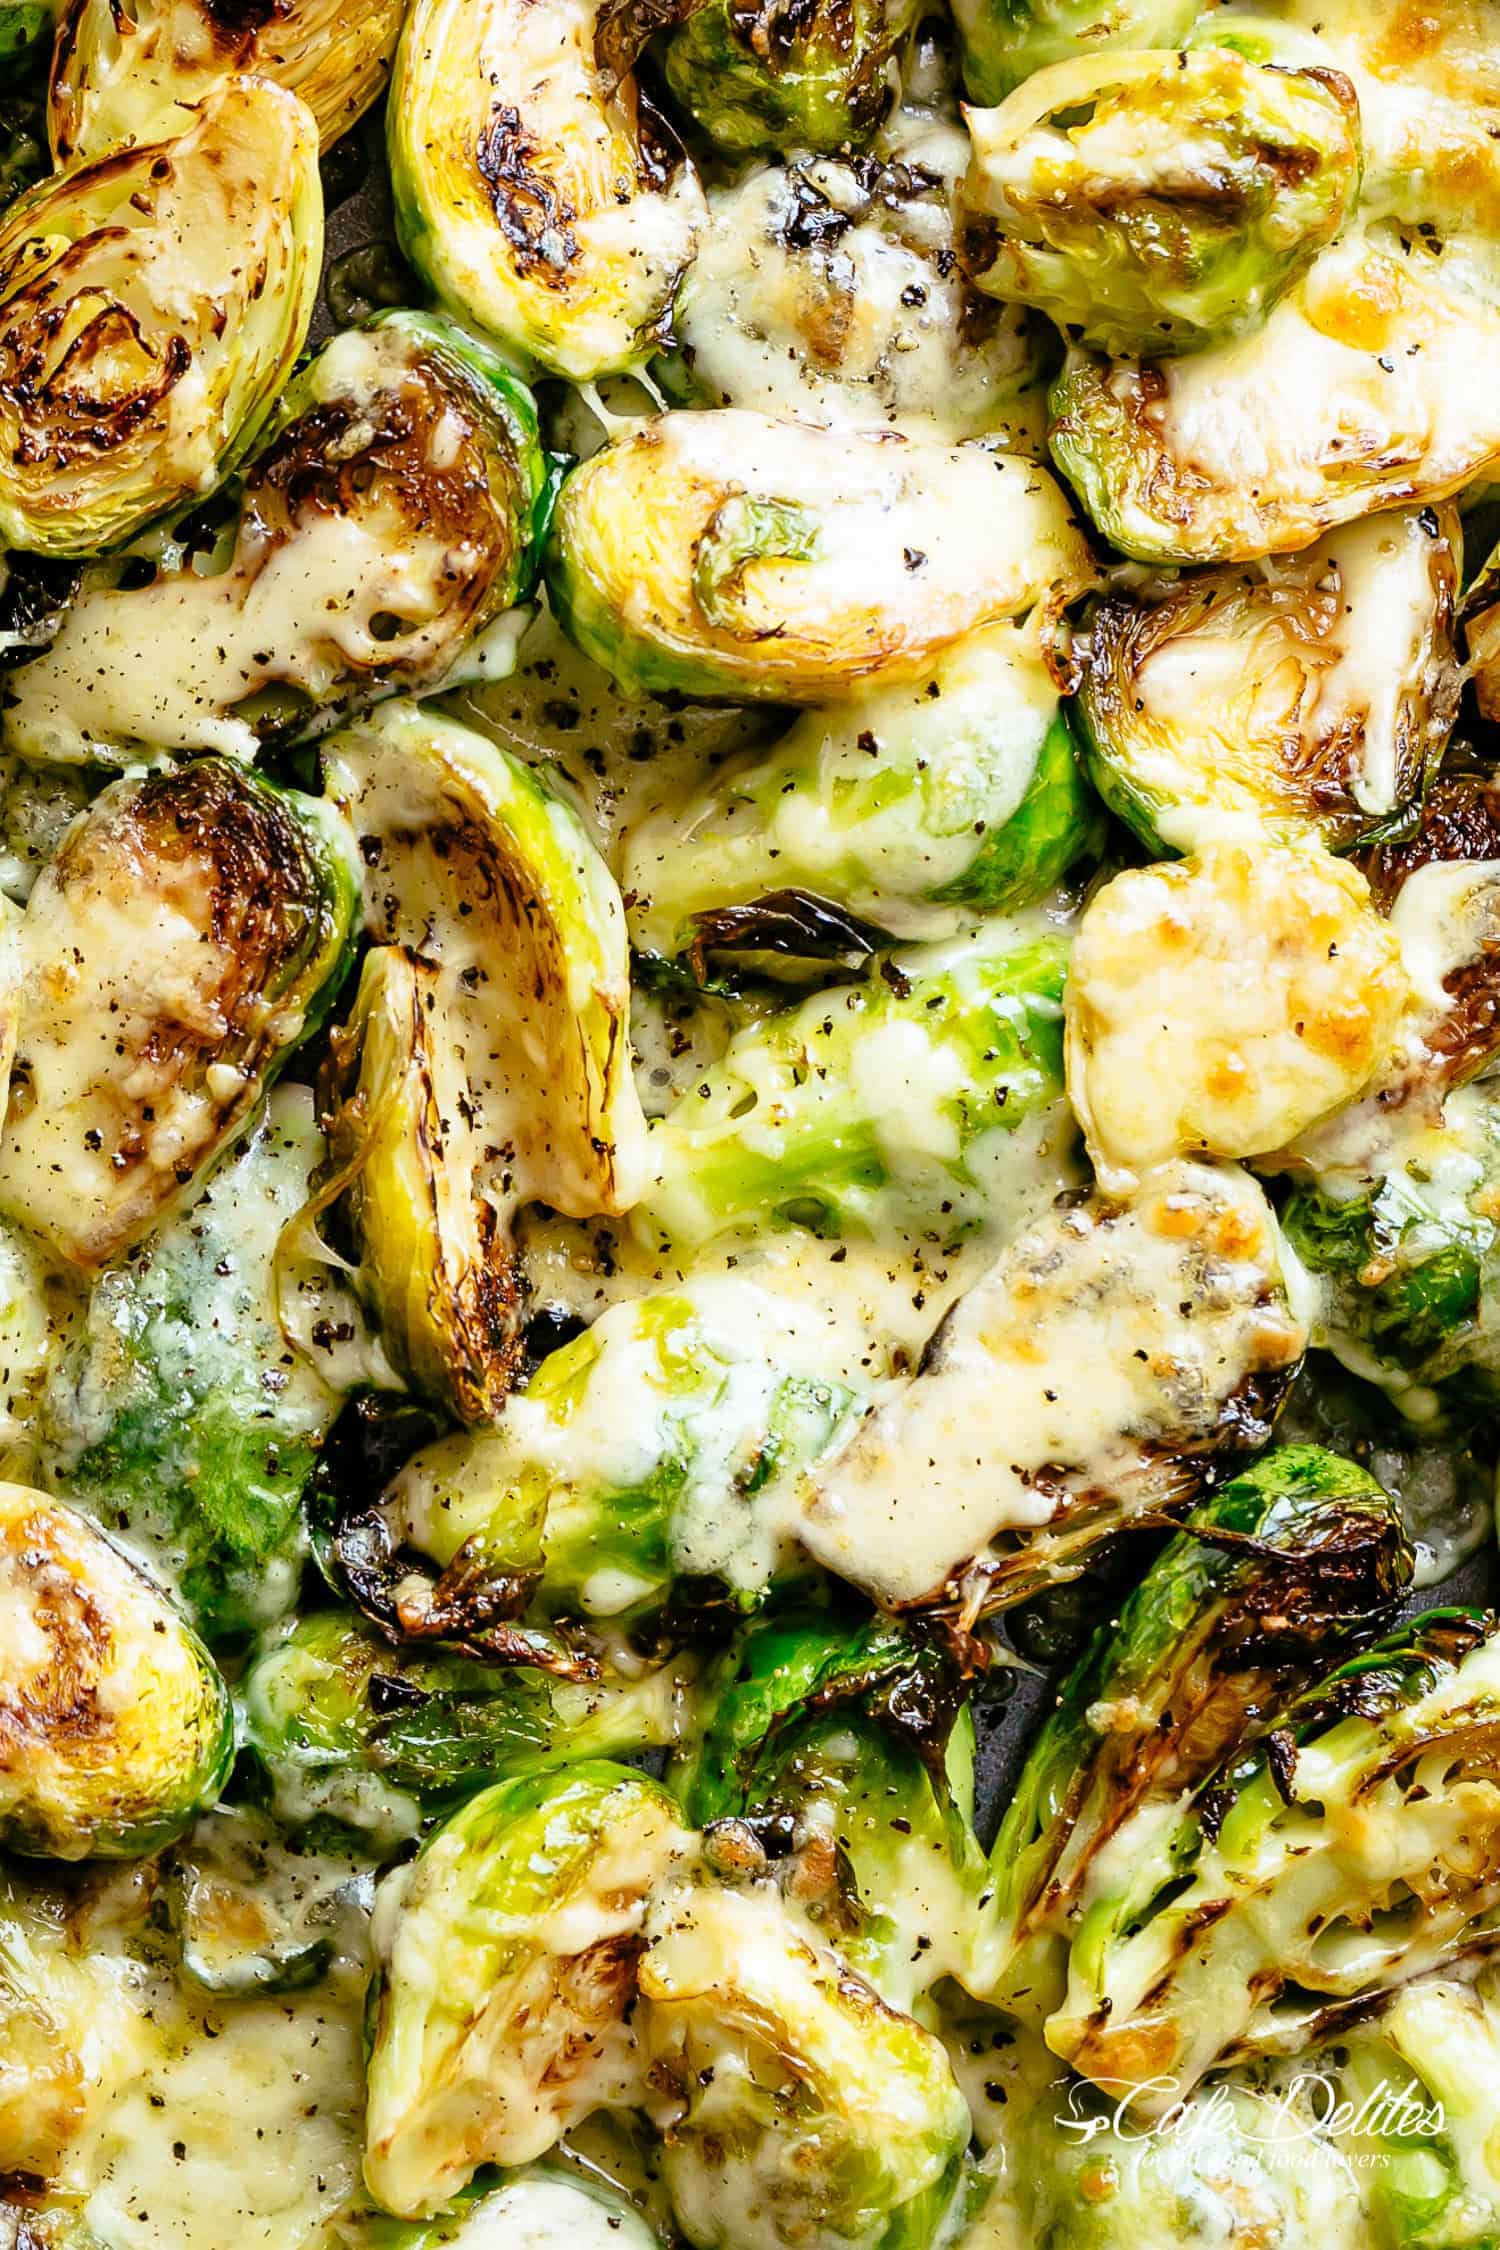 Cheesy Garlic Roasted Brussels Sprouts Recipe caramelized and topped with melted mozzarella cheese! | cafedelites.com